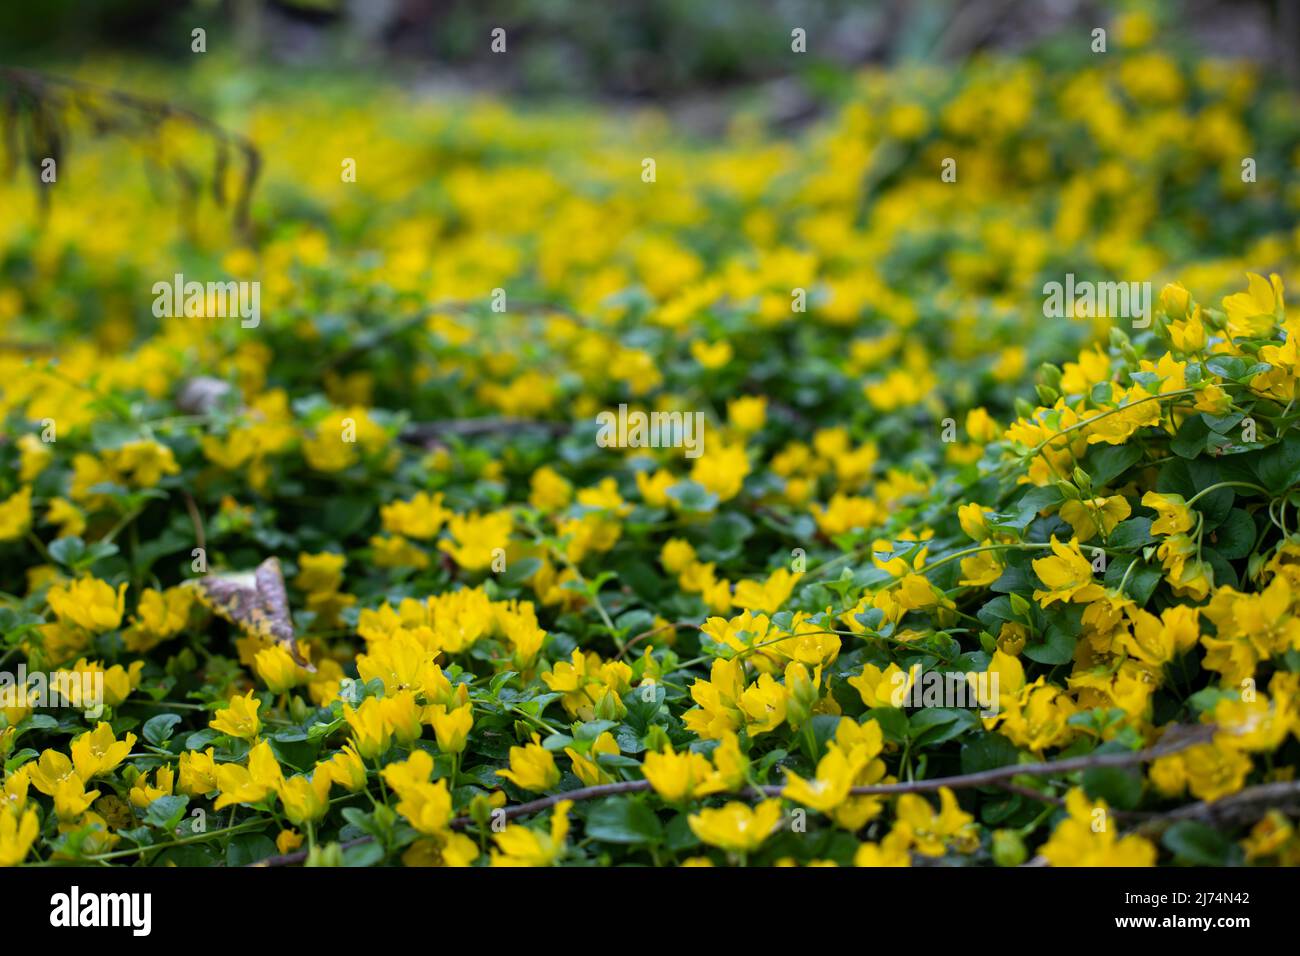 Fairy cover loosestrife moneywort close-up, beautiful lawn plant Lysimachia blossom with yellow flowers in nature Stock Photo